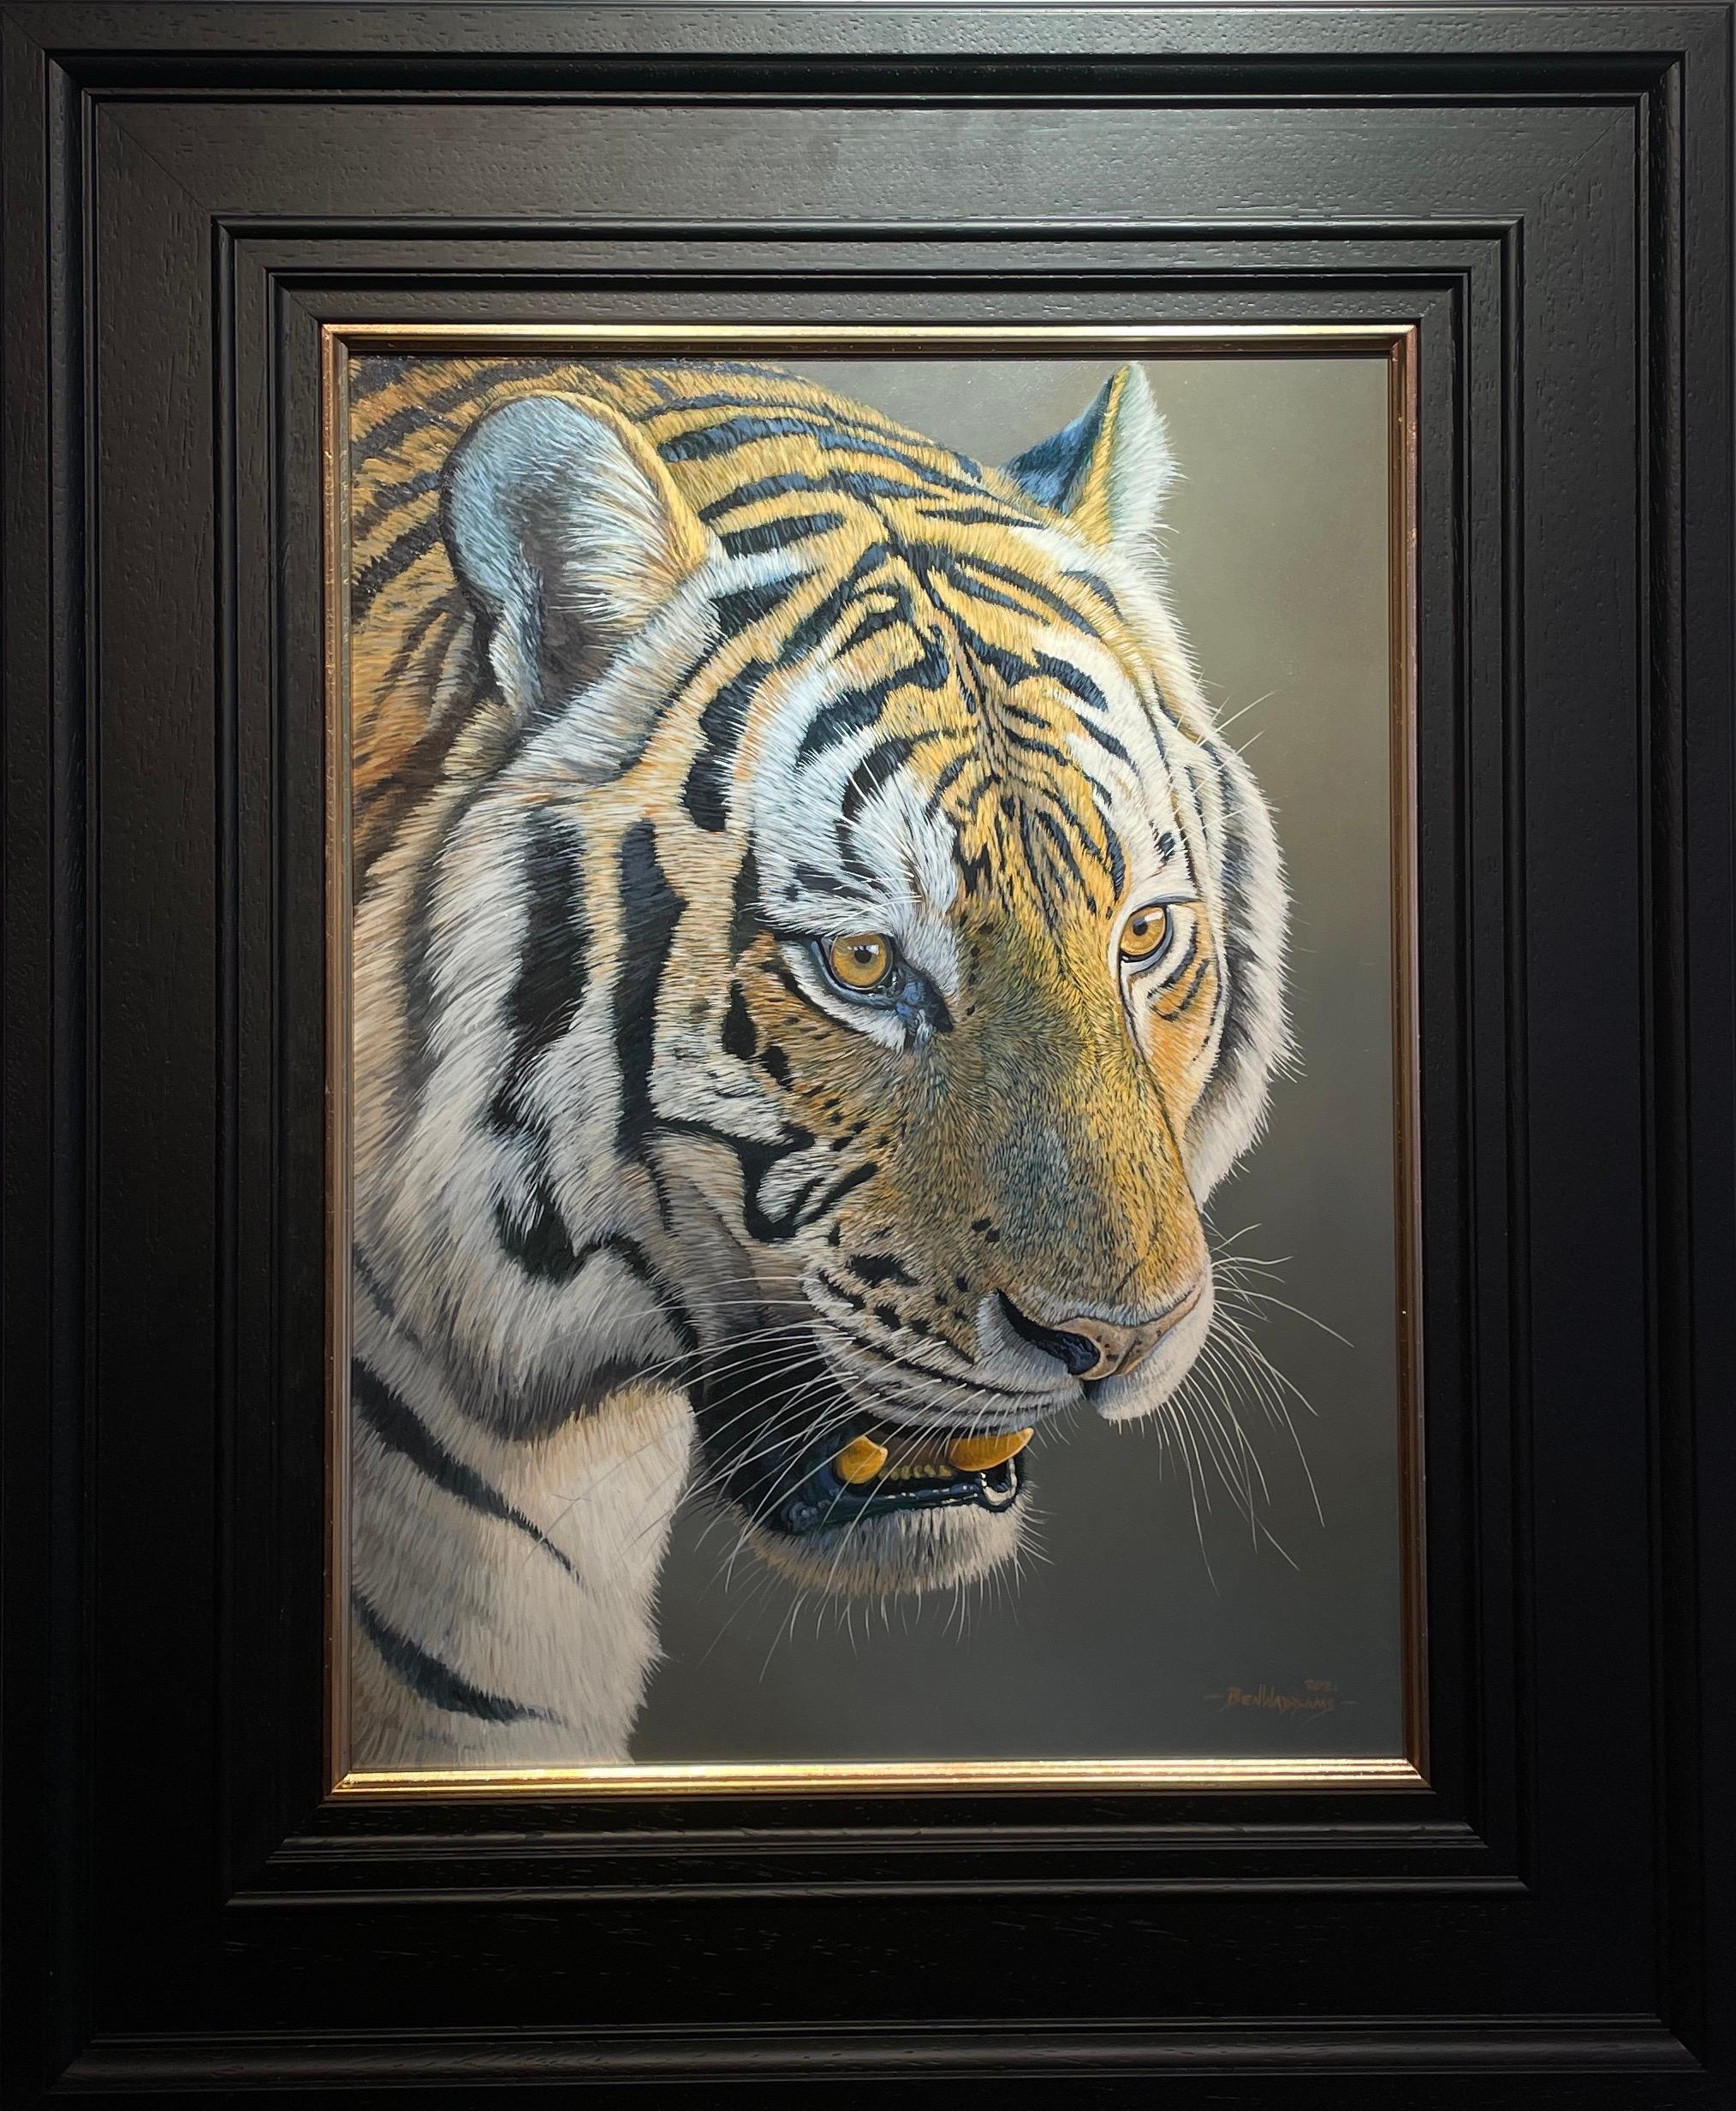 Ben Waddams - 'Focus' Photorealist painting of a Tiger, ready to pounce,  orange, grey and black For Sale at 1stDibs